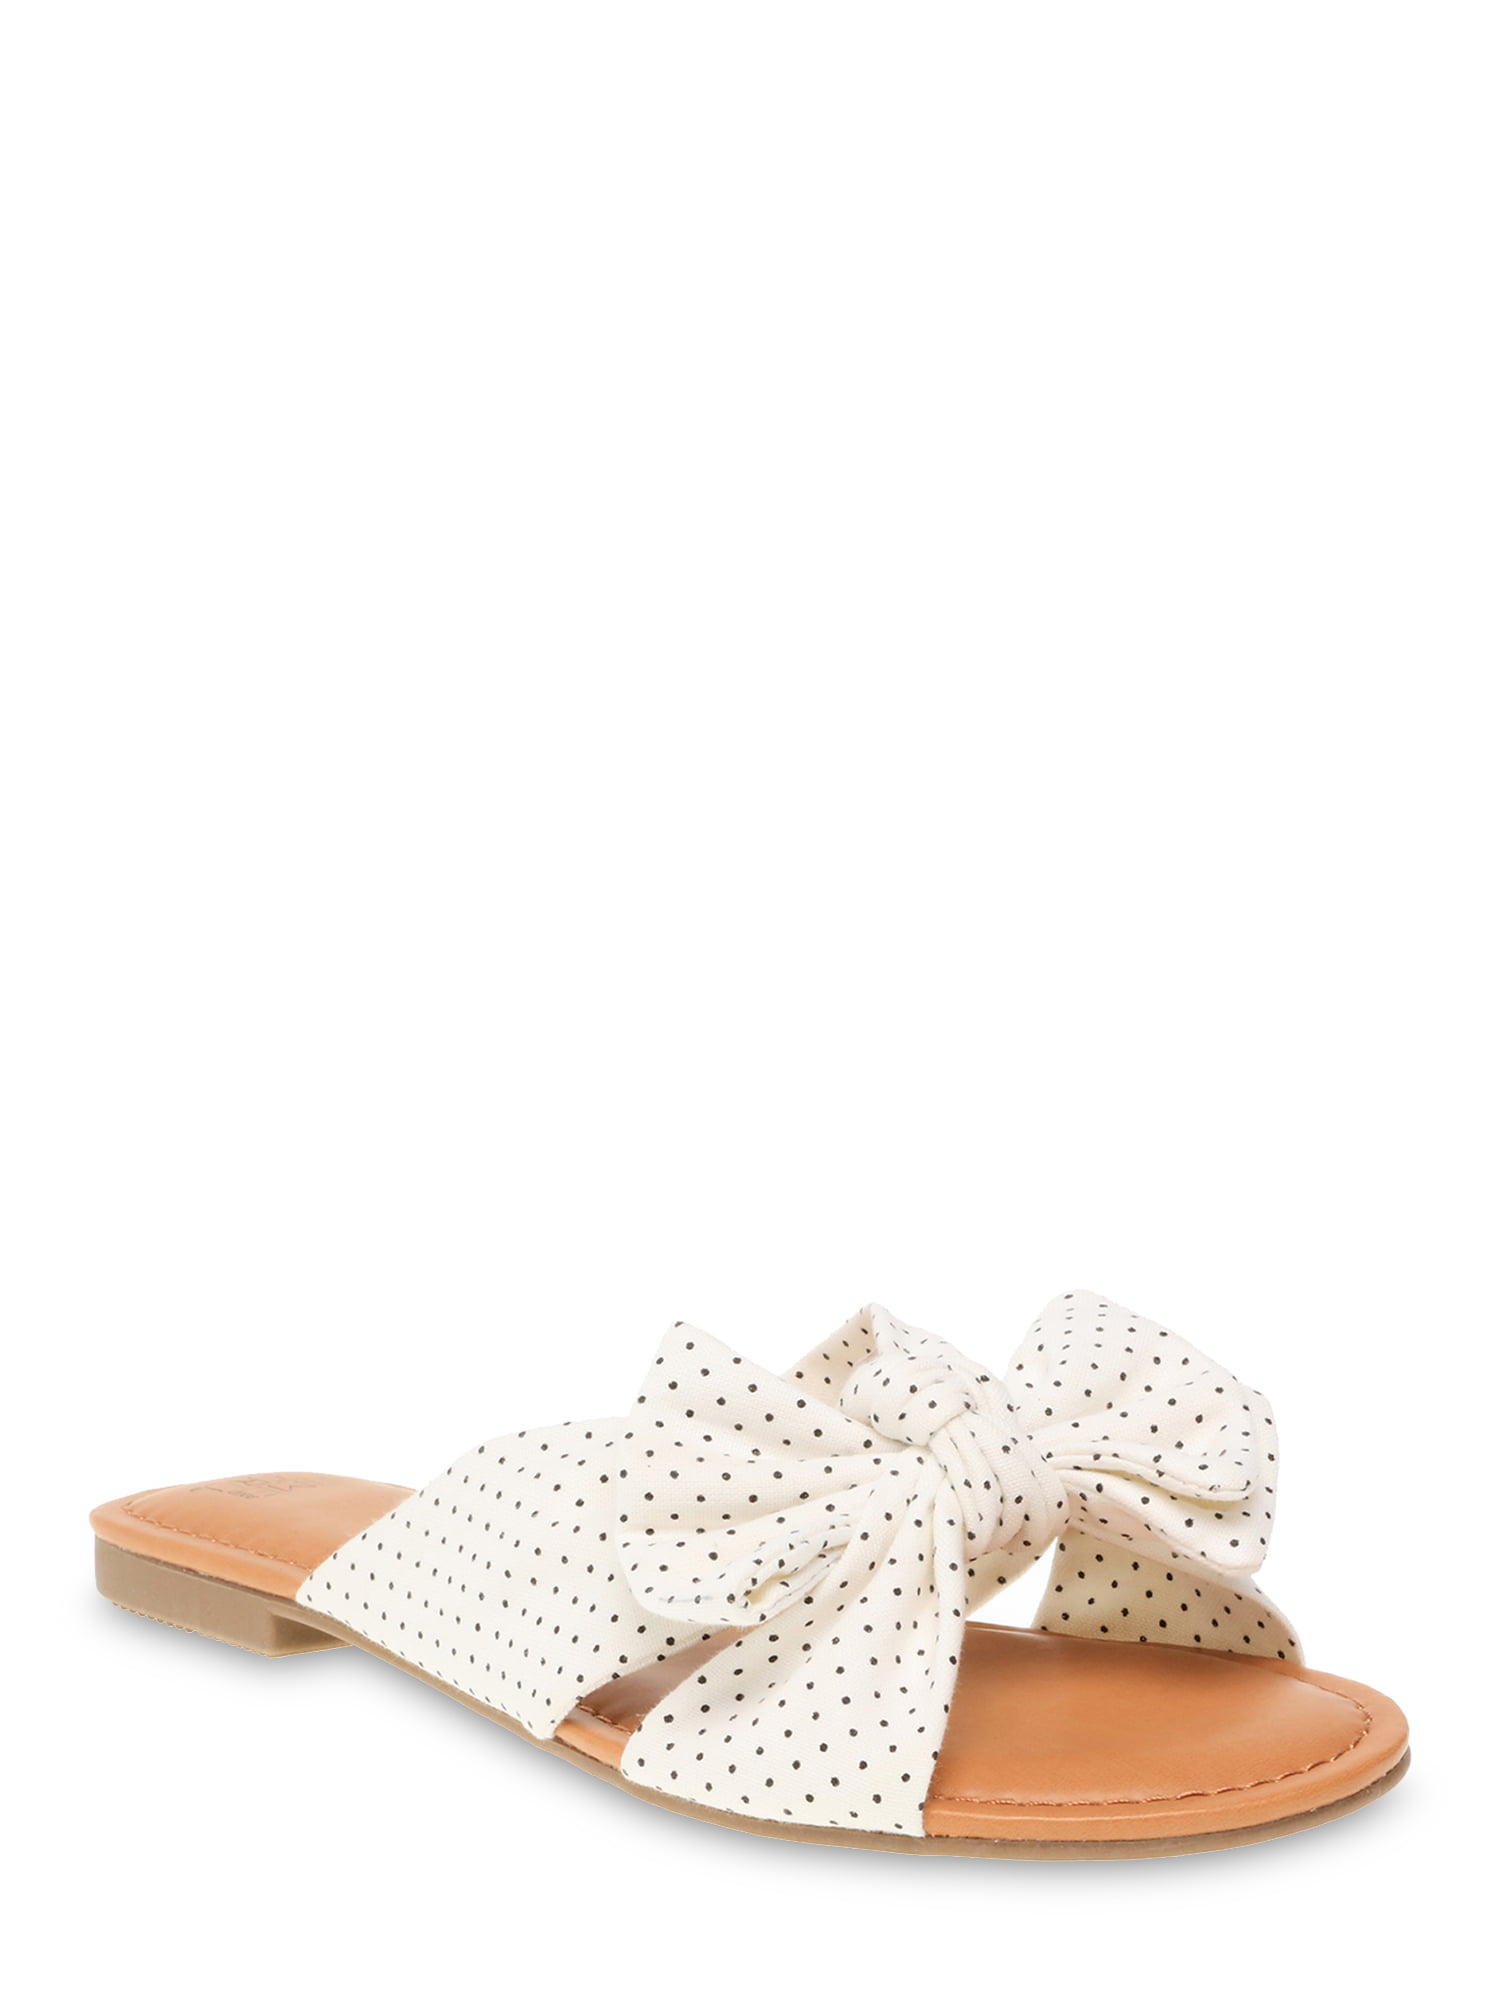 women's slide sandals with bow